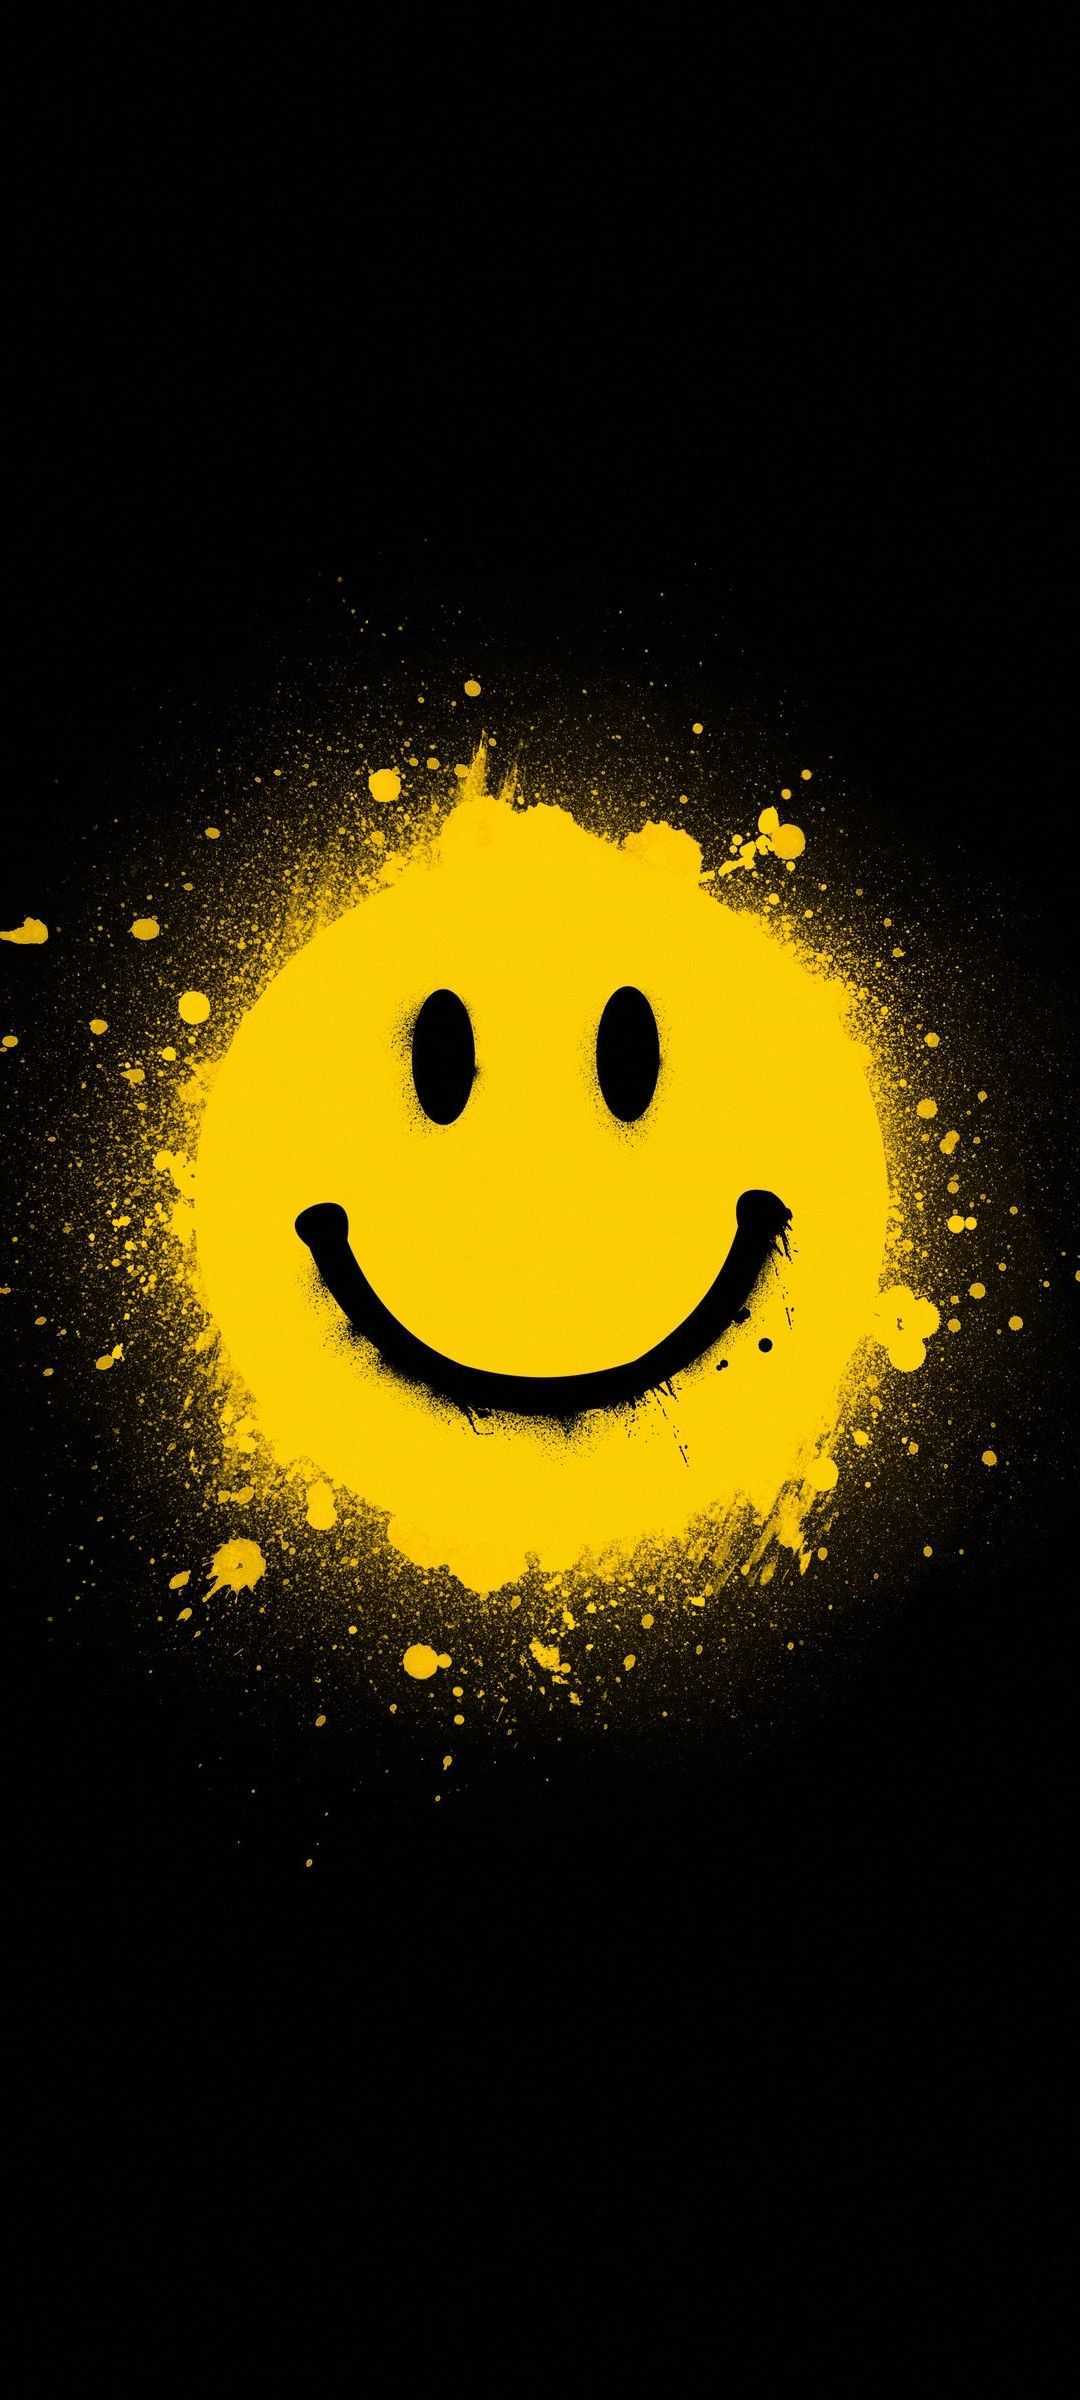 Smiley Face Iphone Wallpaper